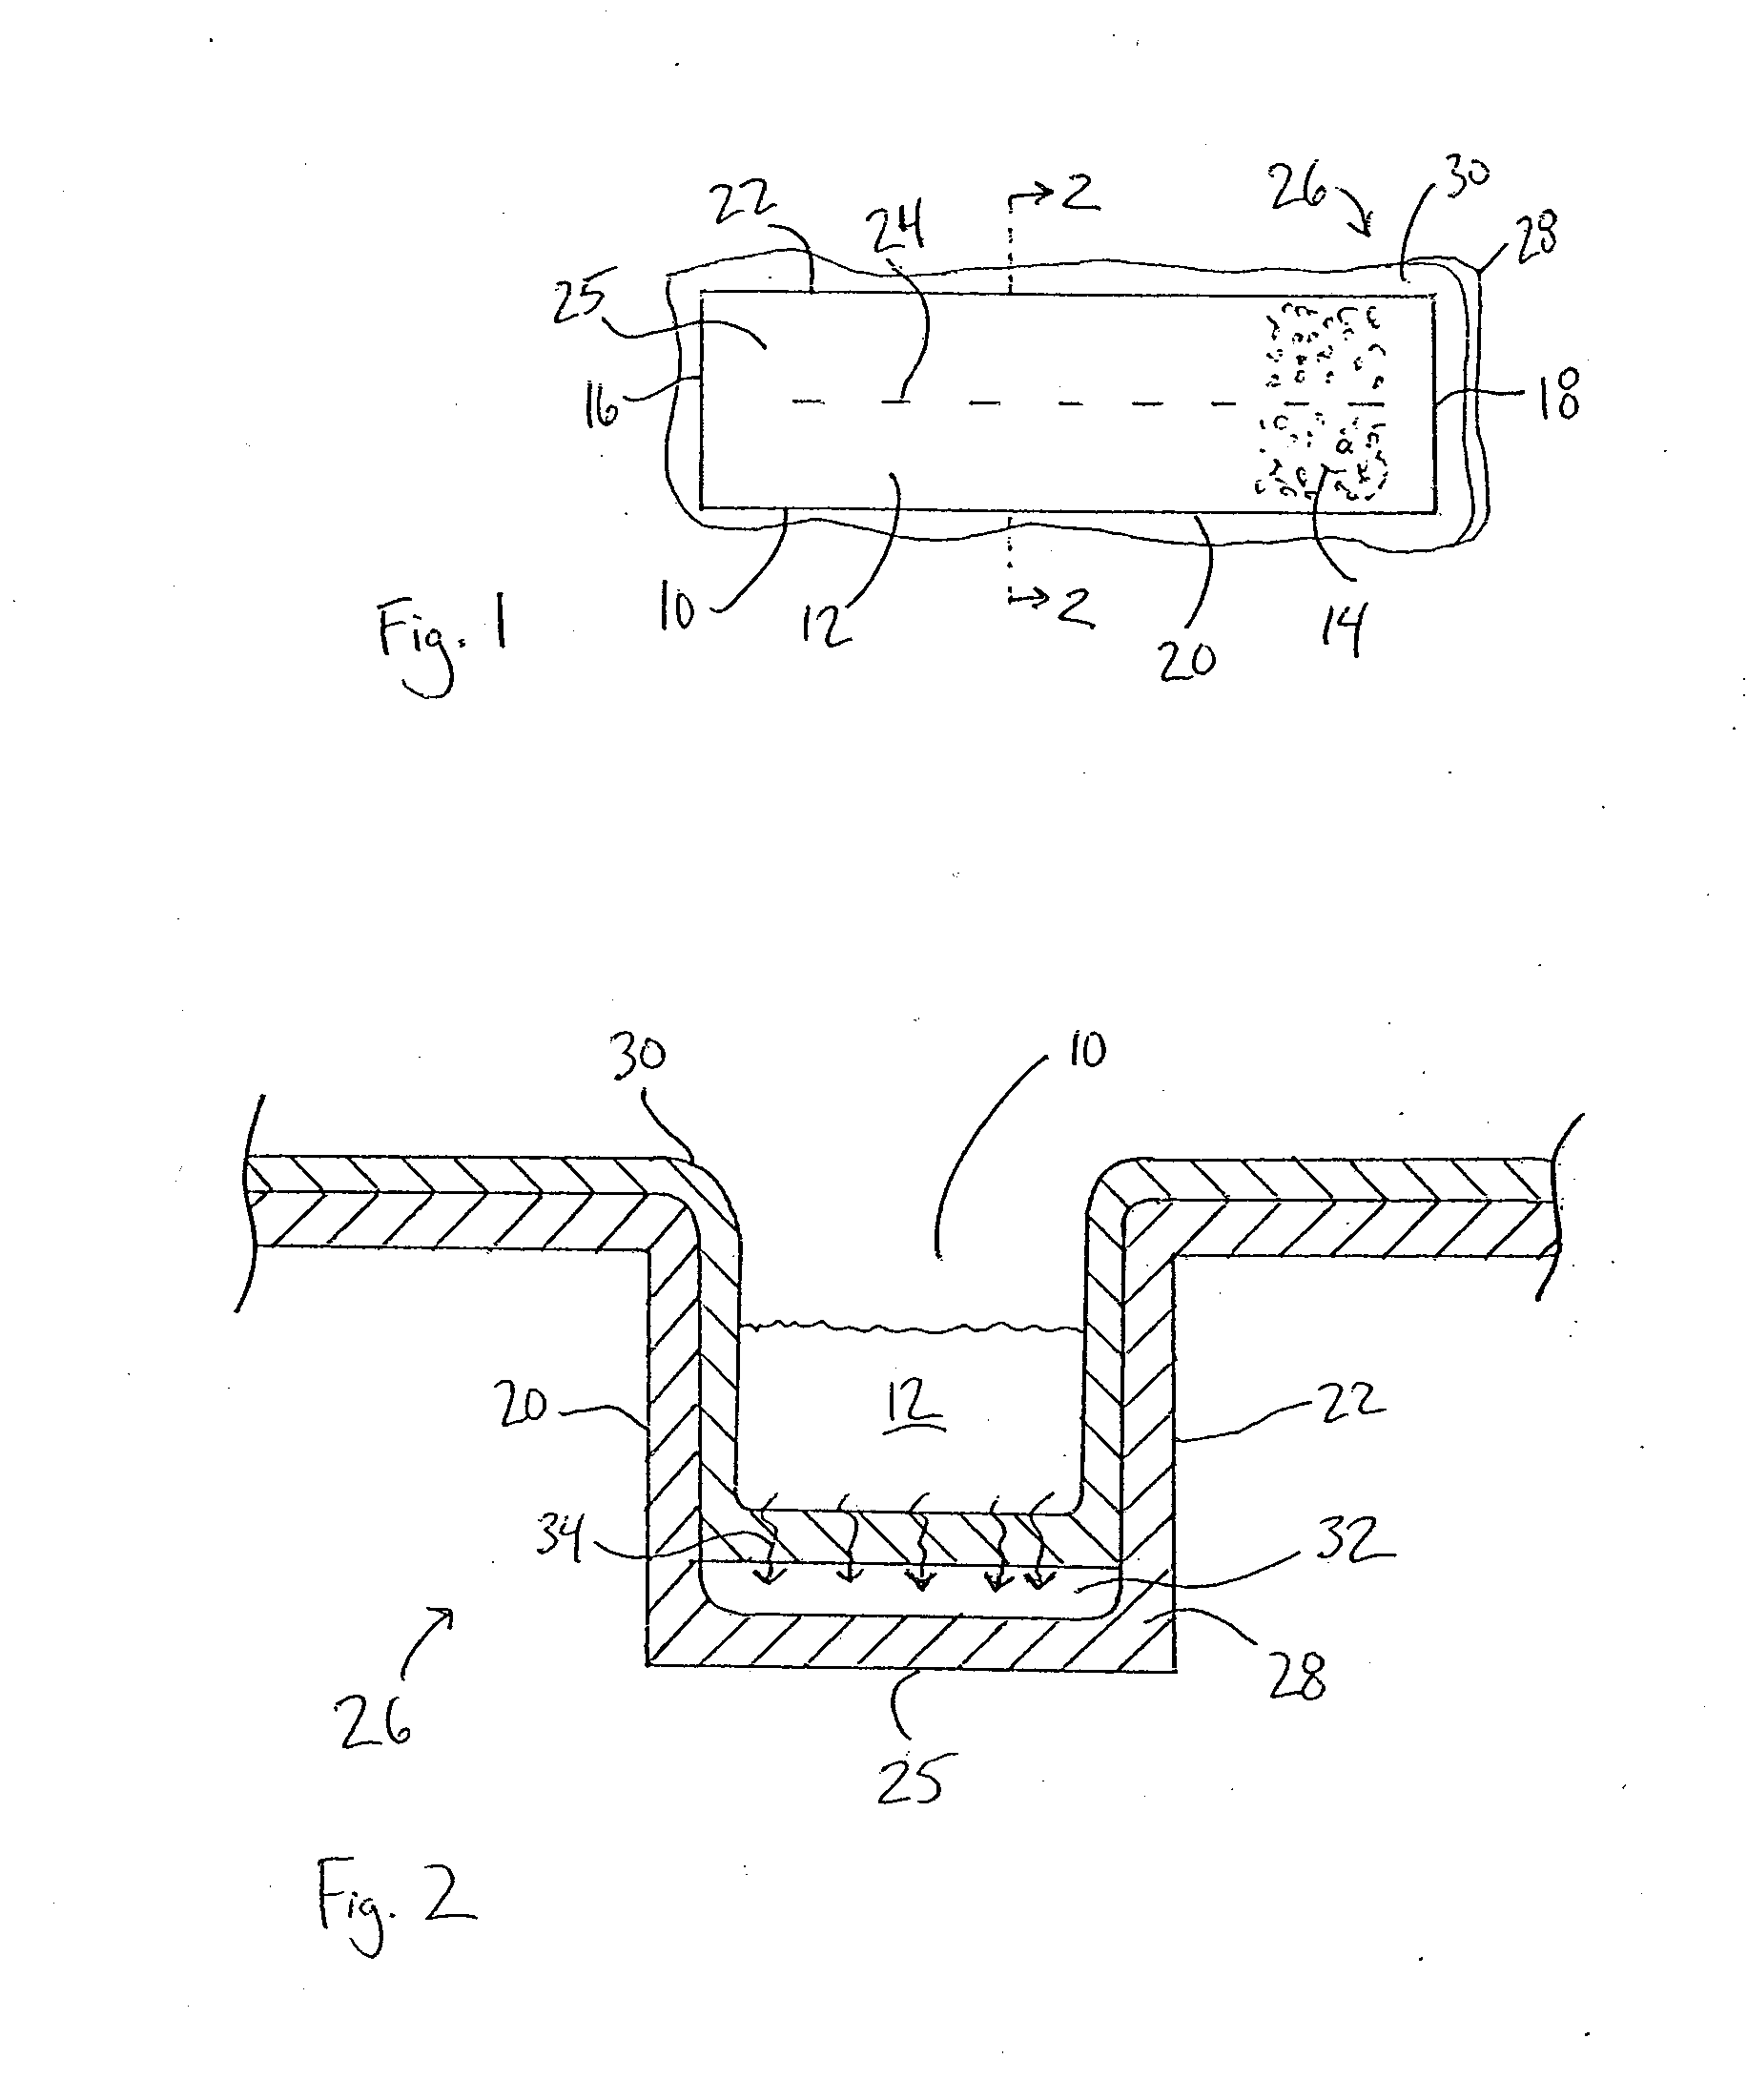 System for moderating the temperature of a medium for growing microalgae